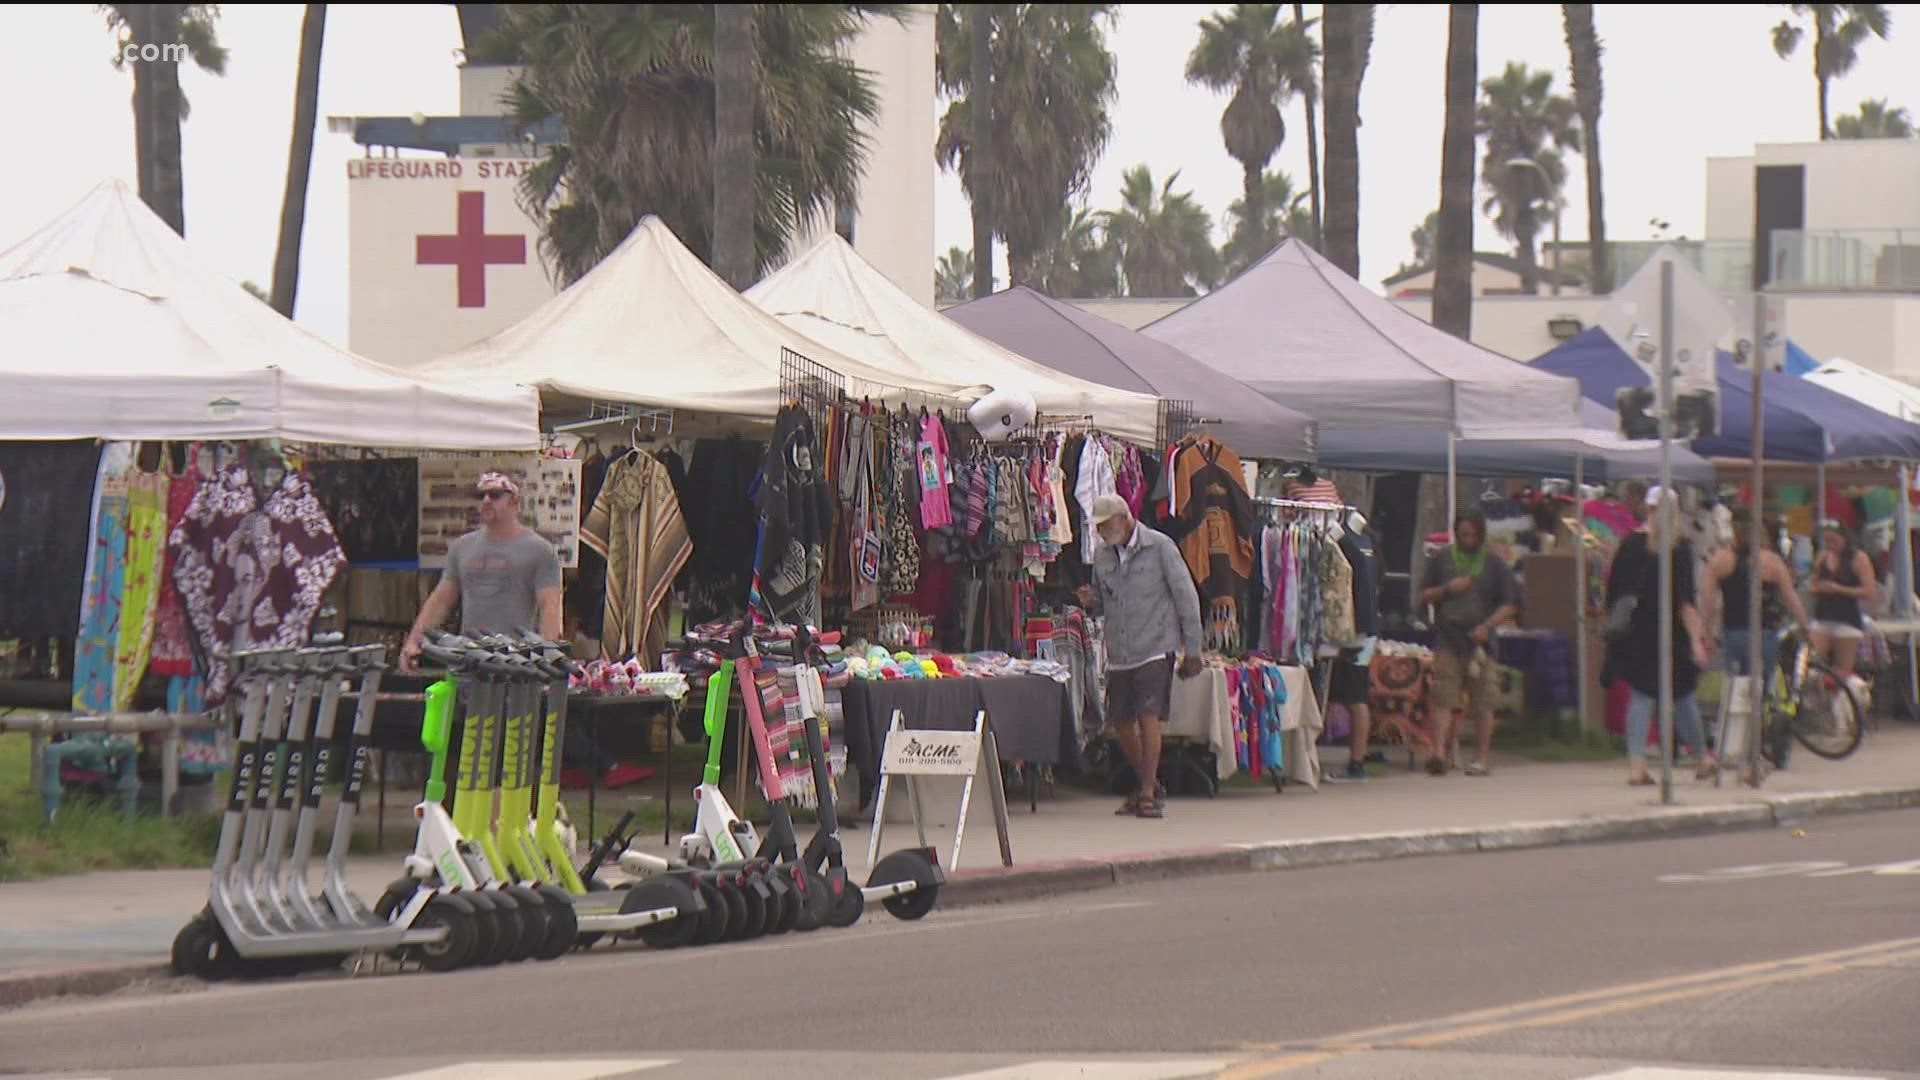 It's been three years since the state passed a law decriminalizing street vendors but many cities have come up with their own permitting program but not San Diego.